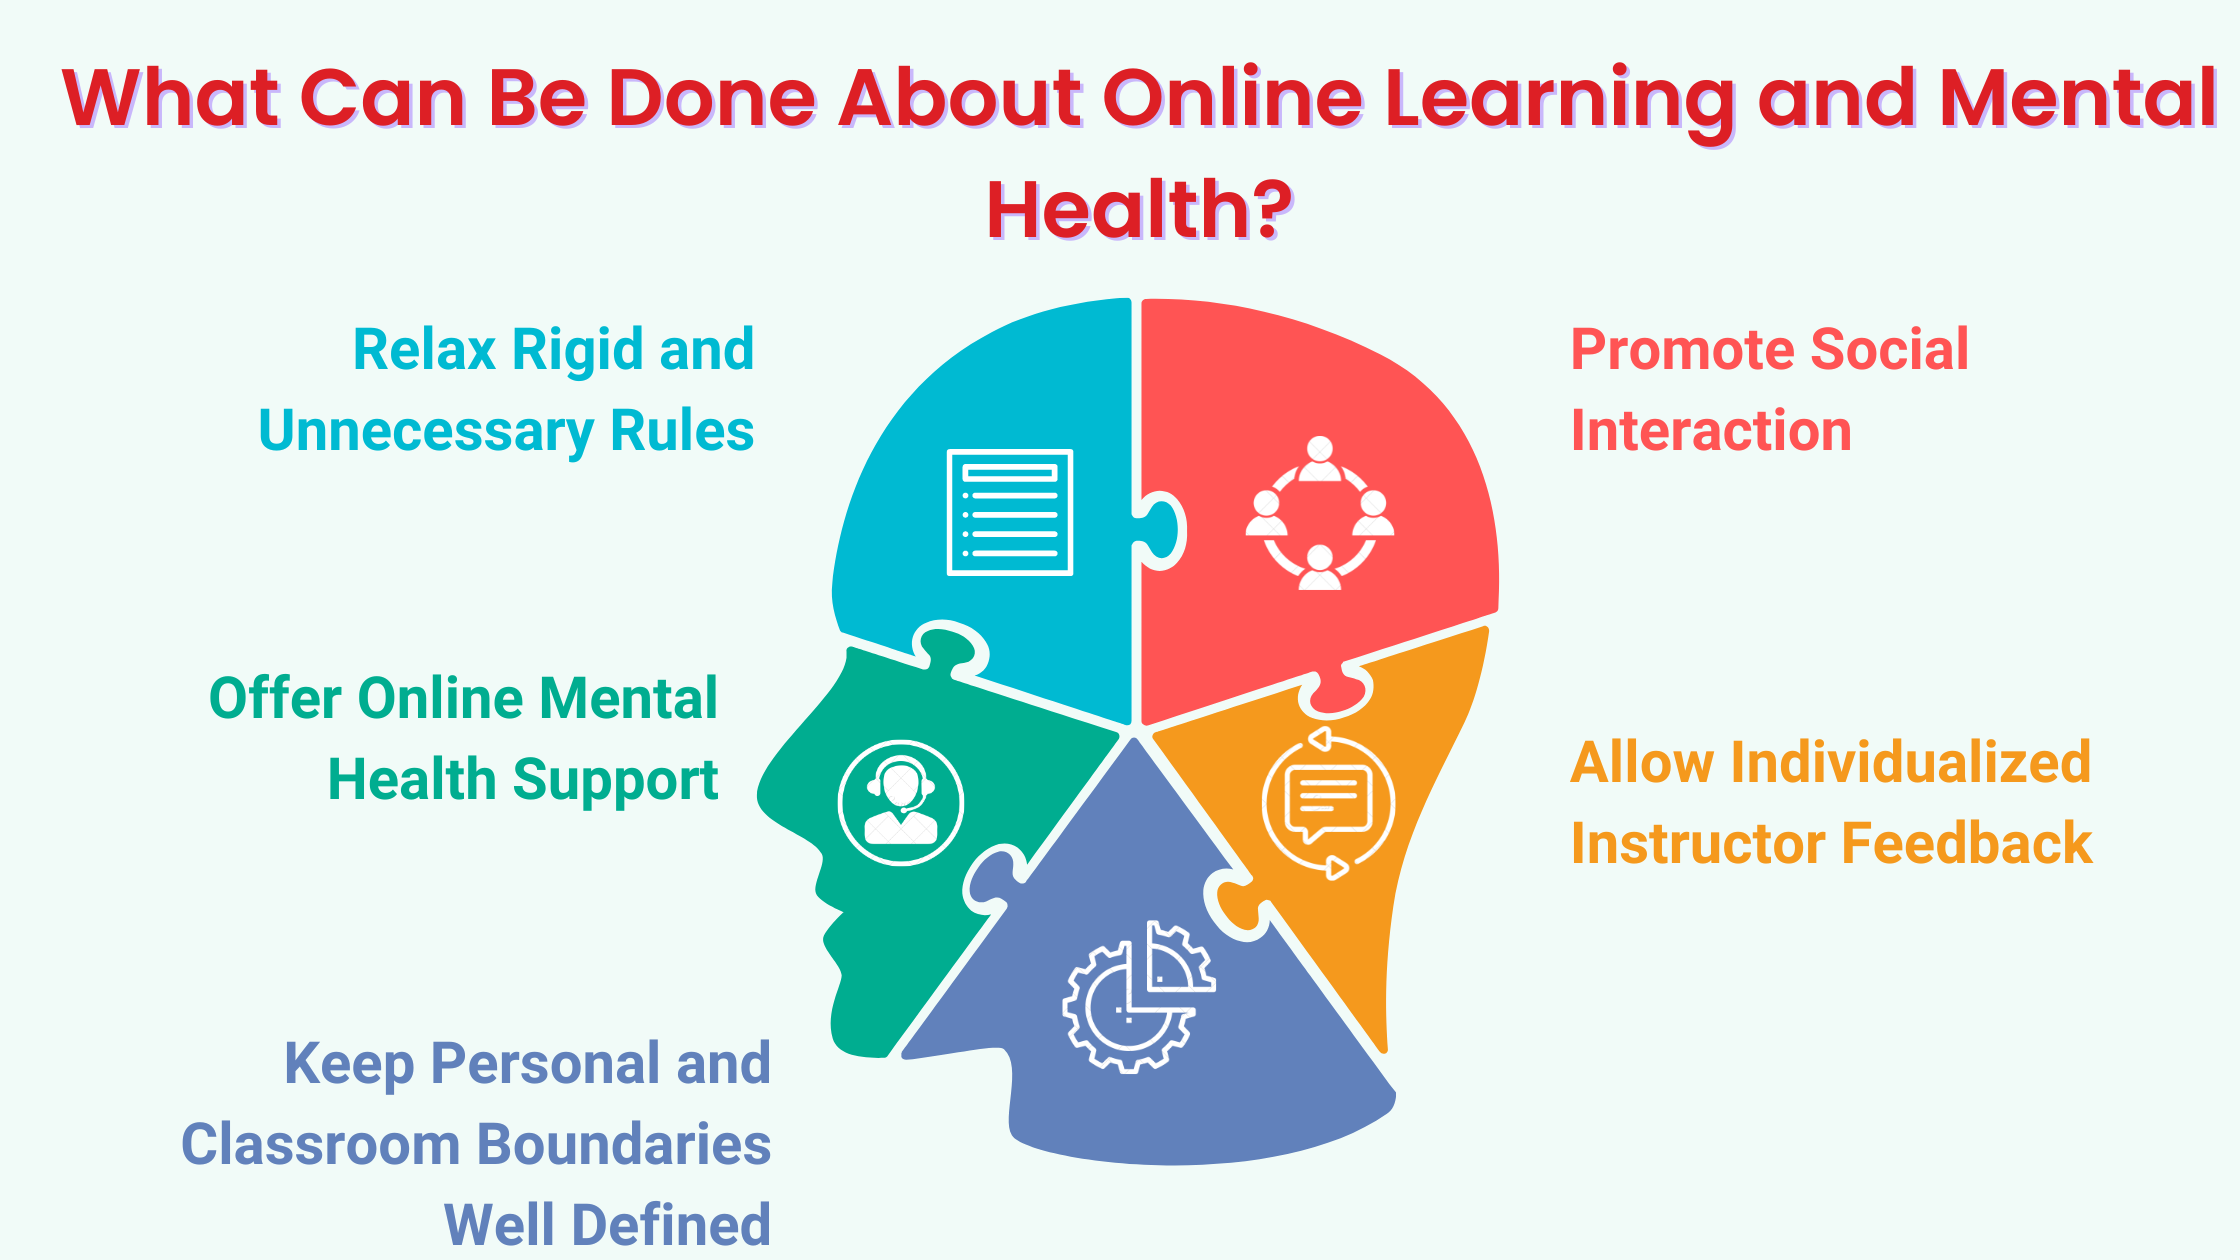 What Can Be Done About Online Learning and Mental Health?